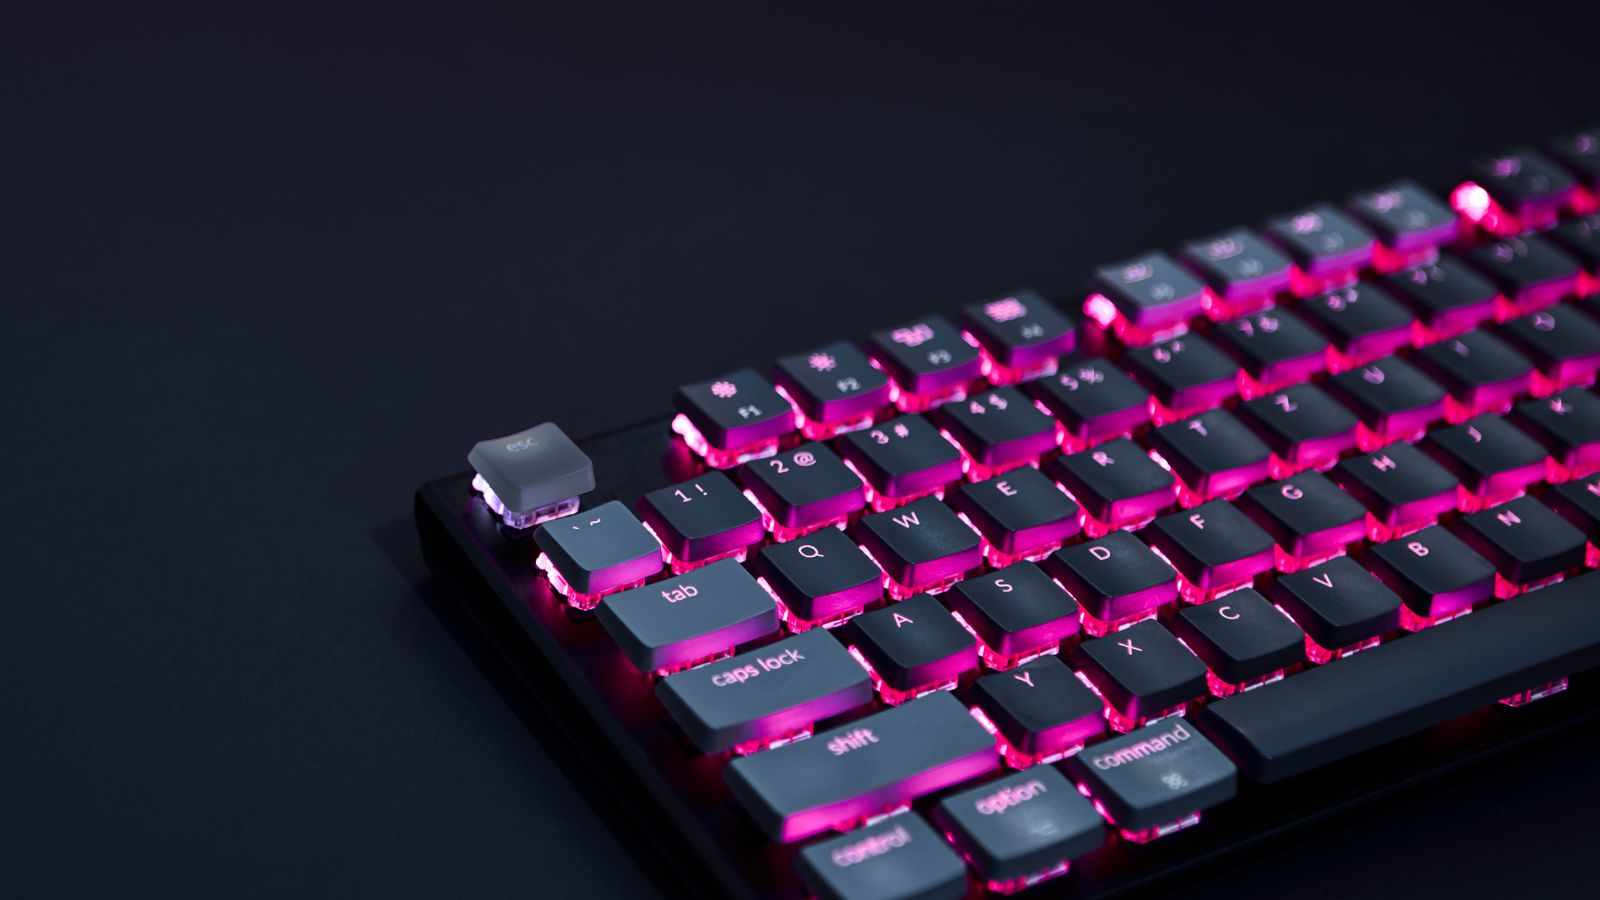 Best Gaming Keyboards Used By Esports Players